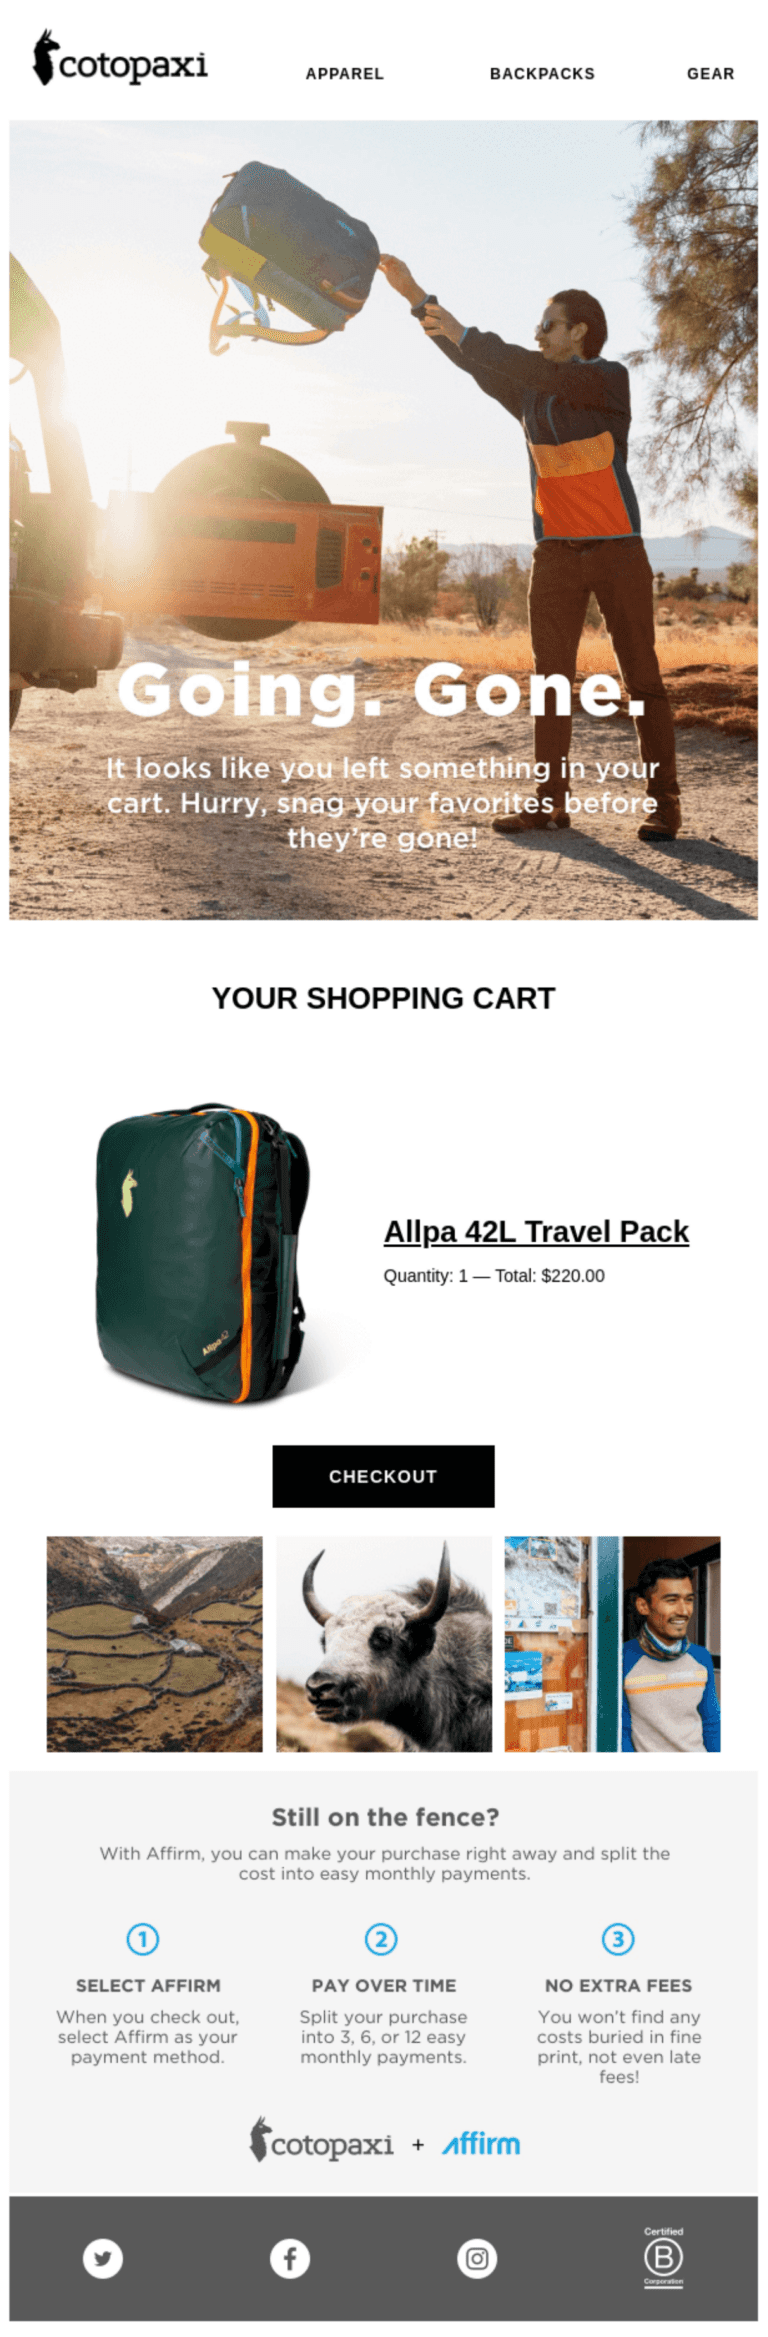 Email personalization examples for a backpack company. It shows a man tossing his backpack in a car and says "Going. Gone."